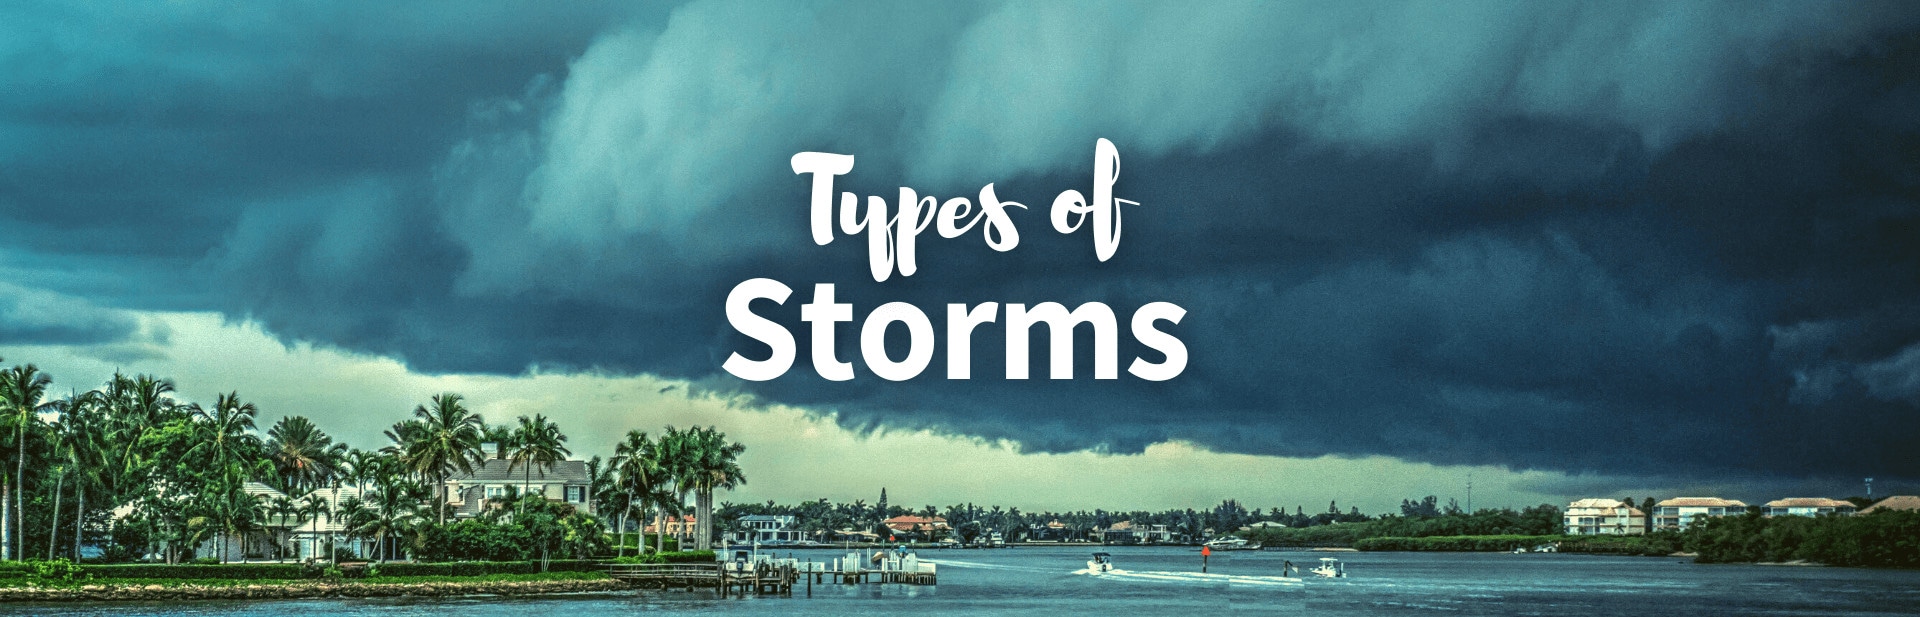 19 Incredible Types of Storms